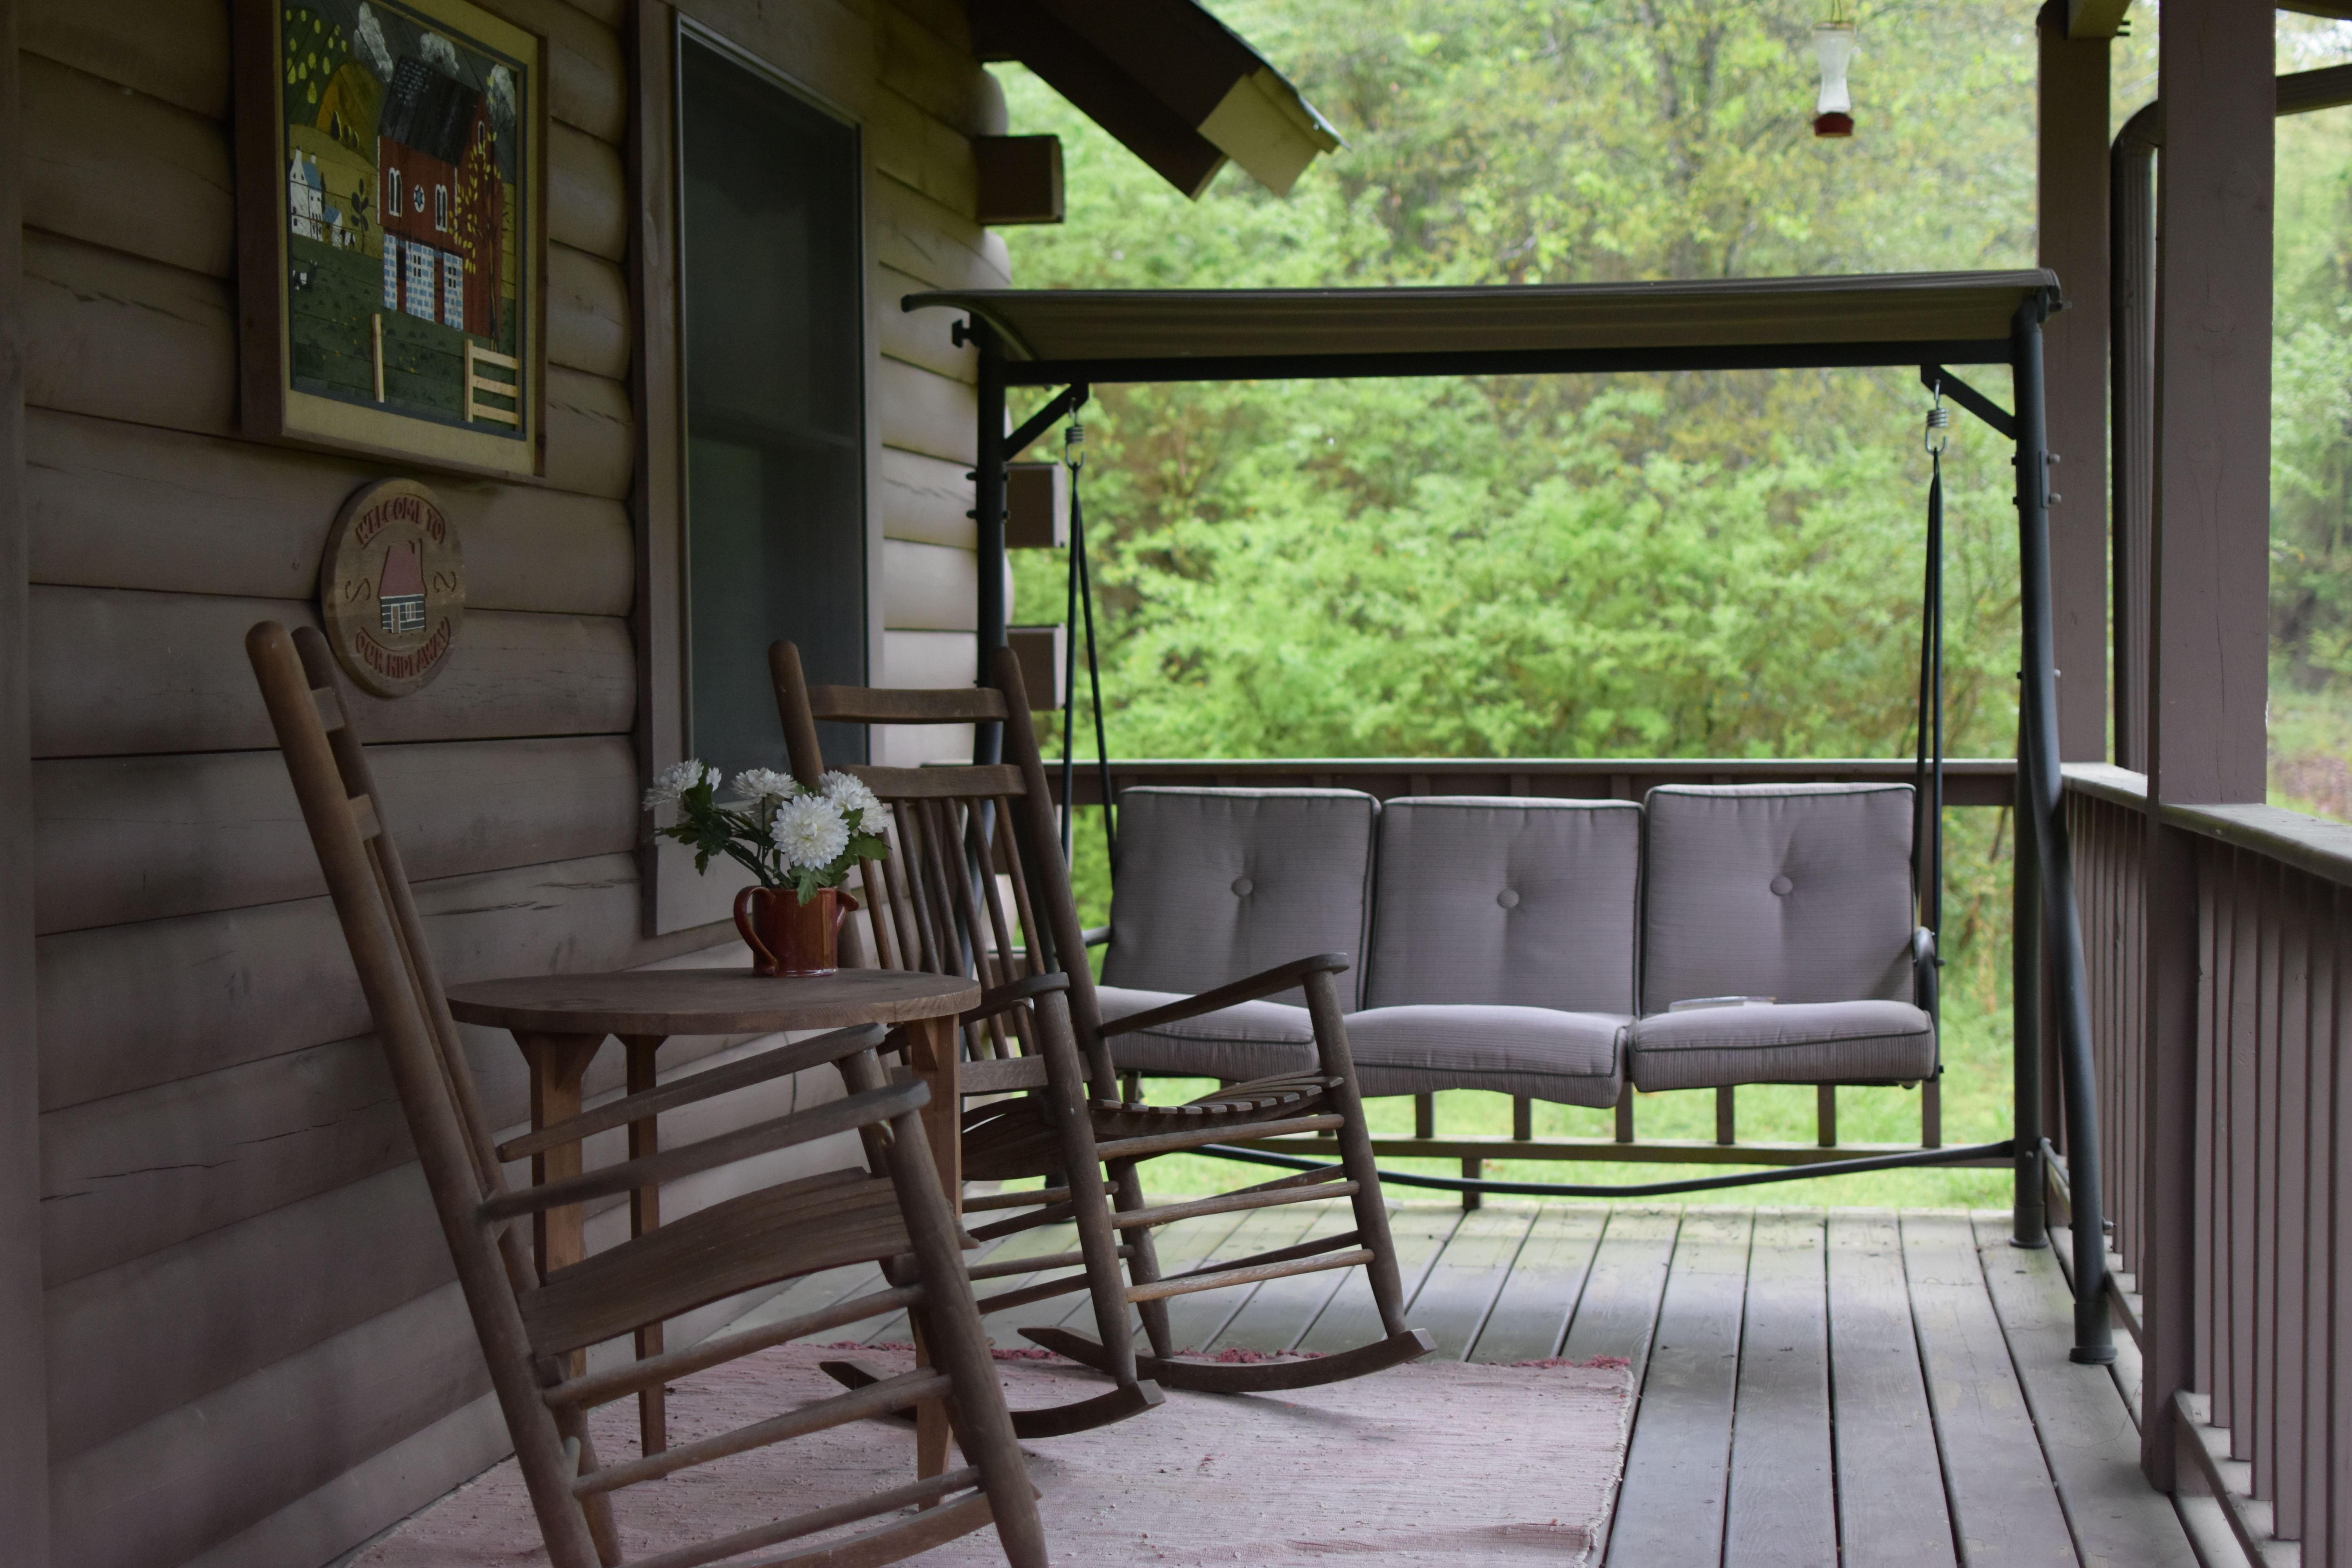 Brown wooden rocking chairs on porch